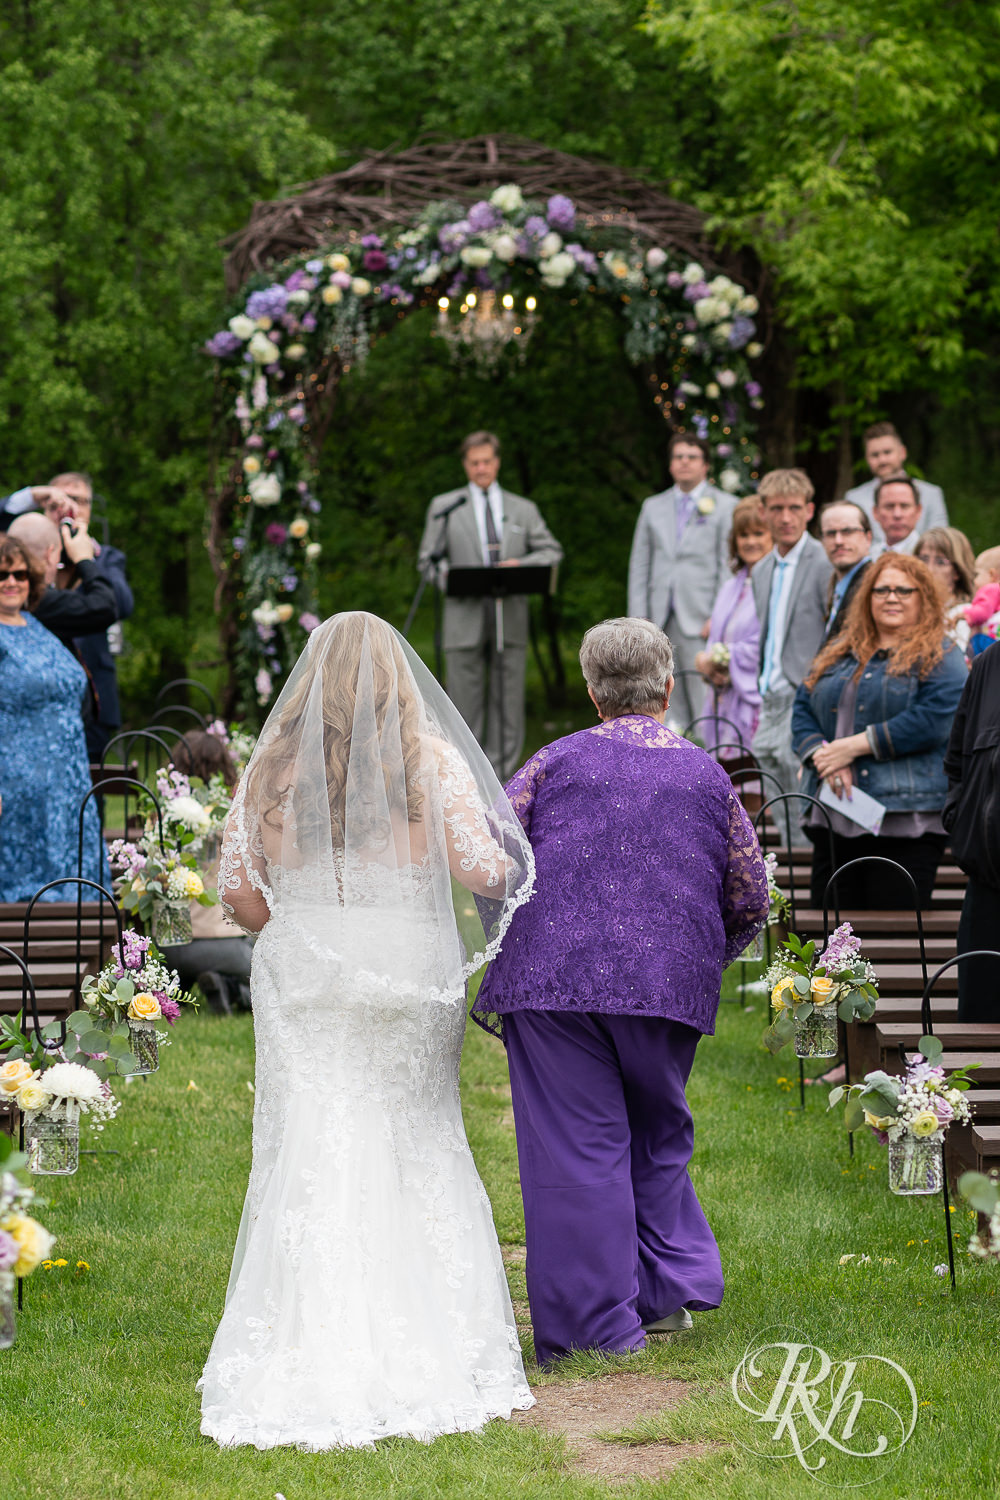 Bride walking down the aisle before ceremony at Hope Glen Farm in Cottage Grove, Minnesota.